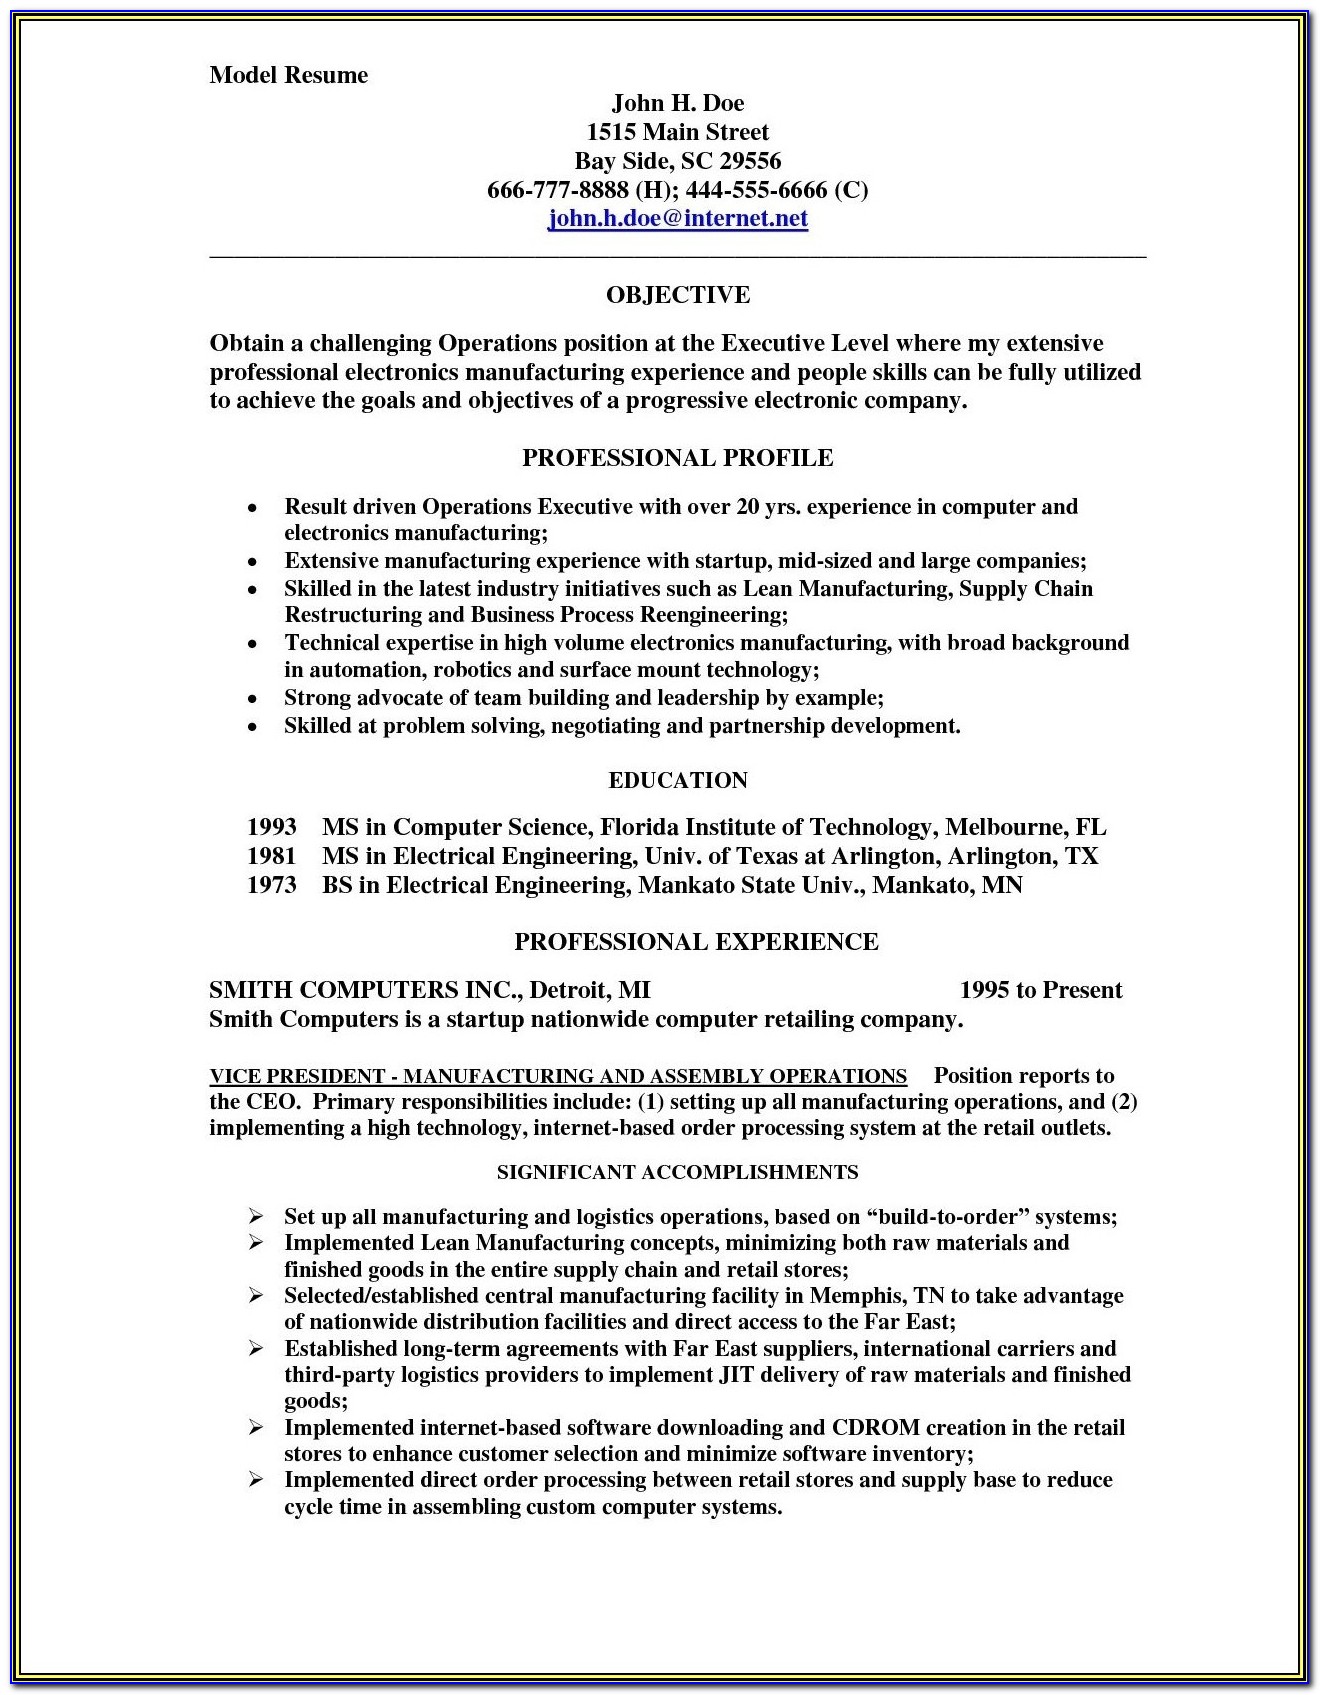 Samples Of Resume Cover Letters For Administrative Assistants